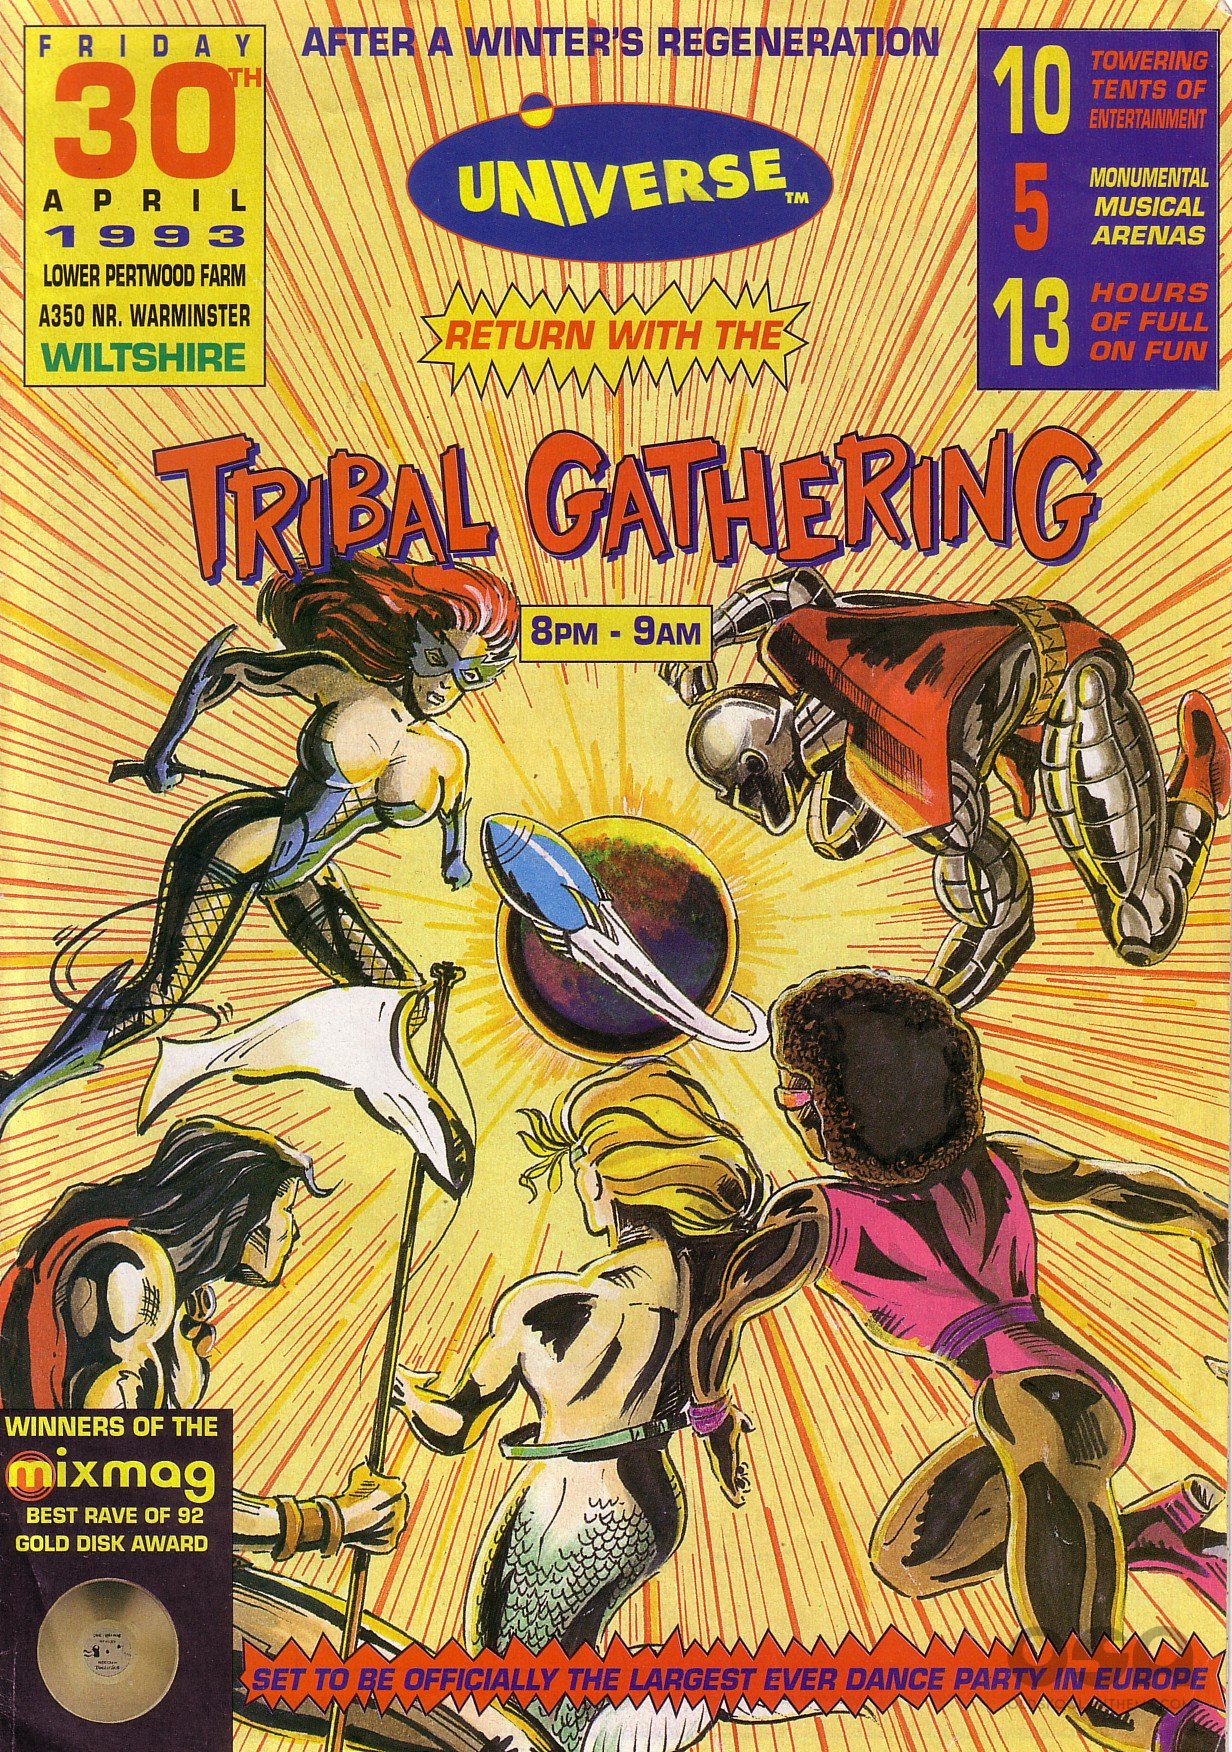 1_Tribal_Gathering_Universe_Fri_30th_April_93___Lower_Pertwood_Farm_Wiltshire__front_page.jpg